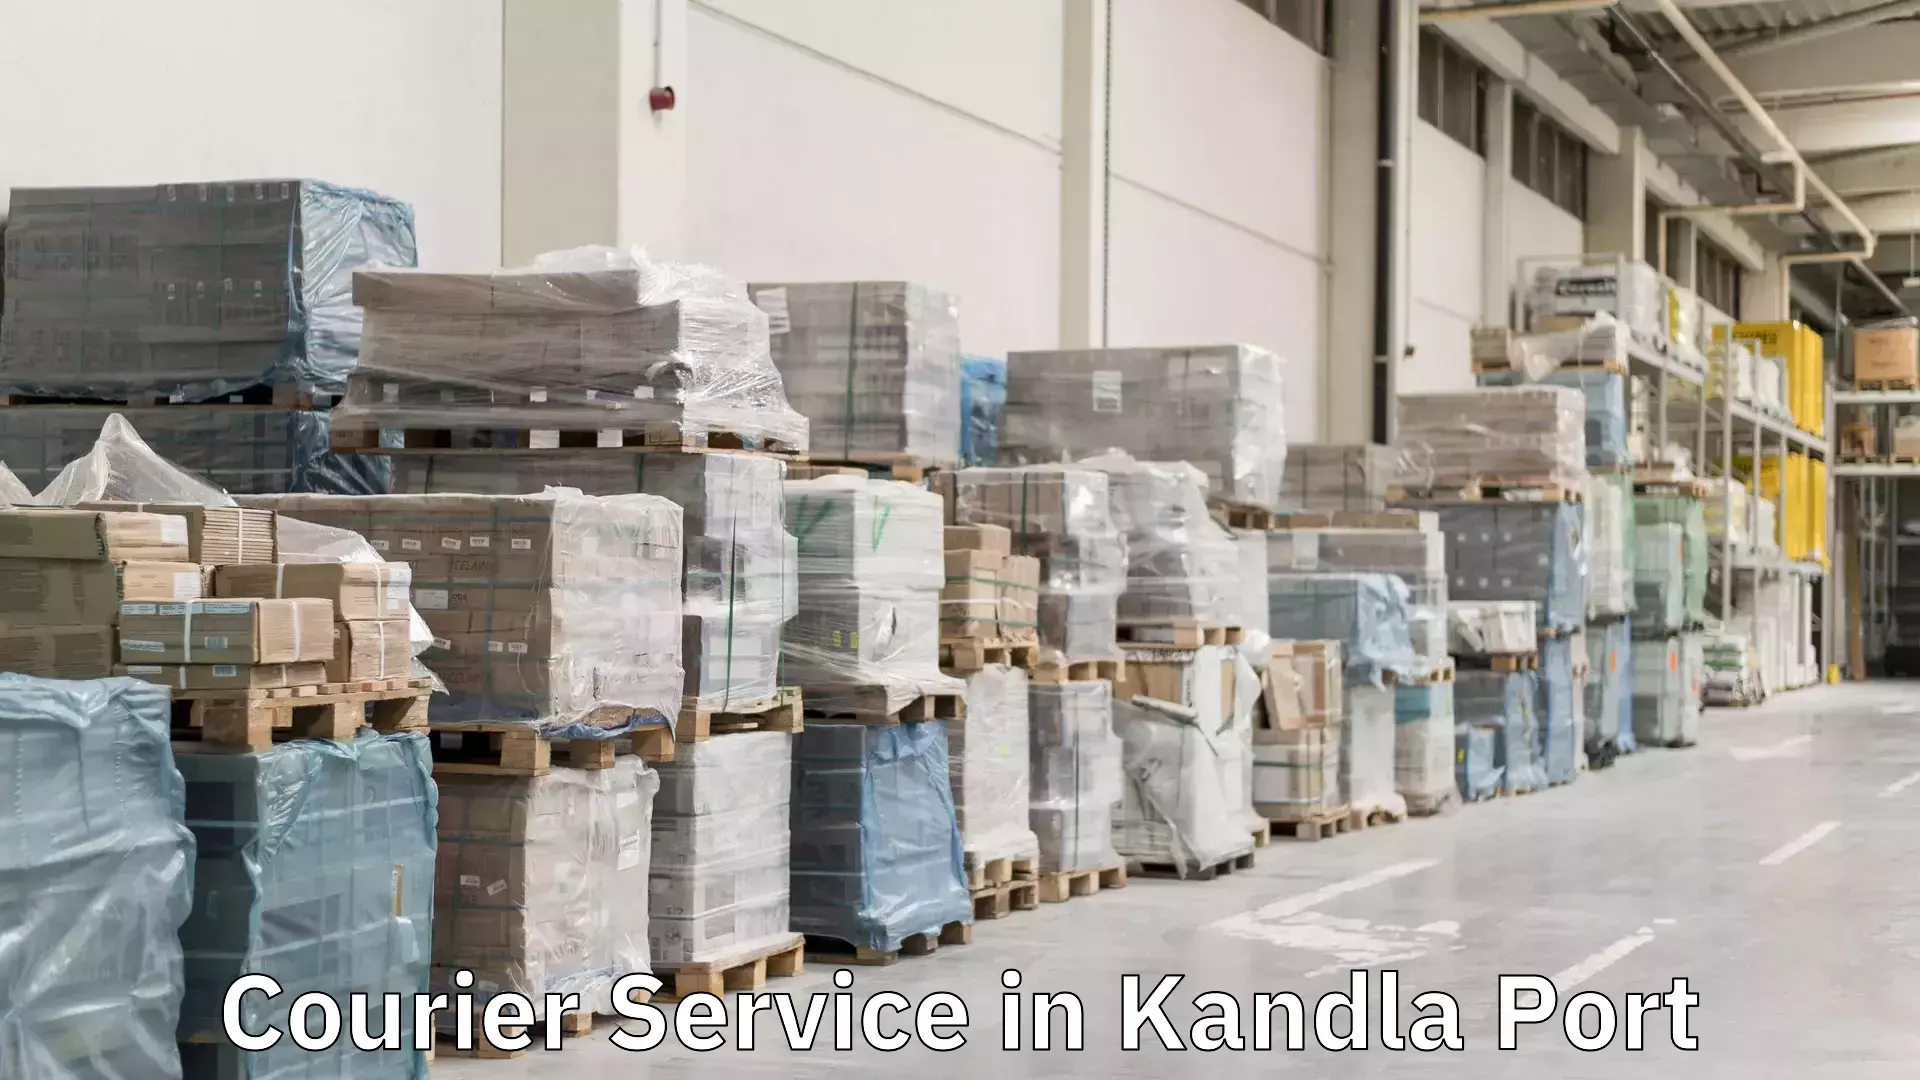 Reliable courier services in Kandla Port